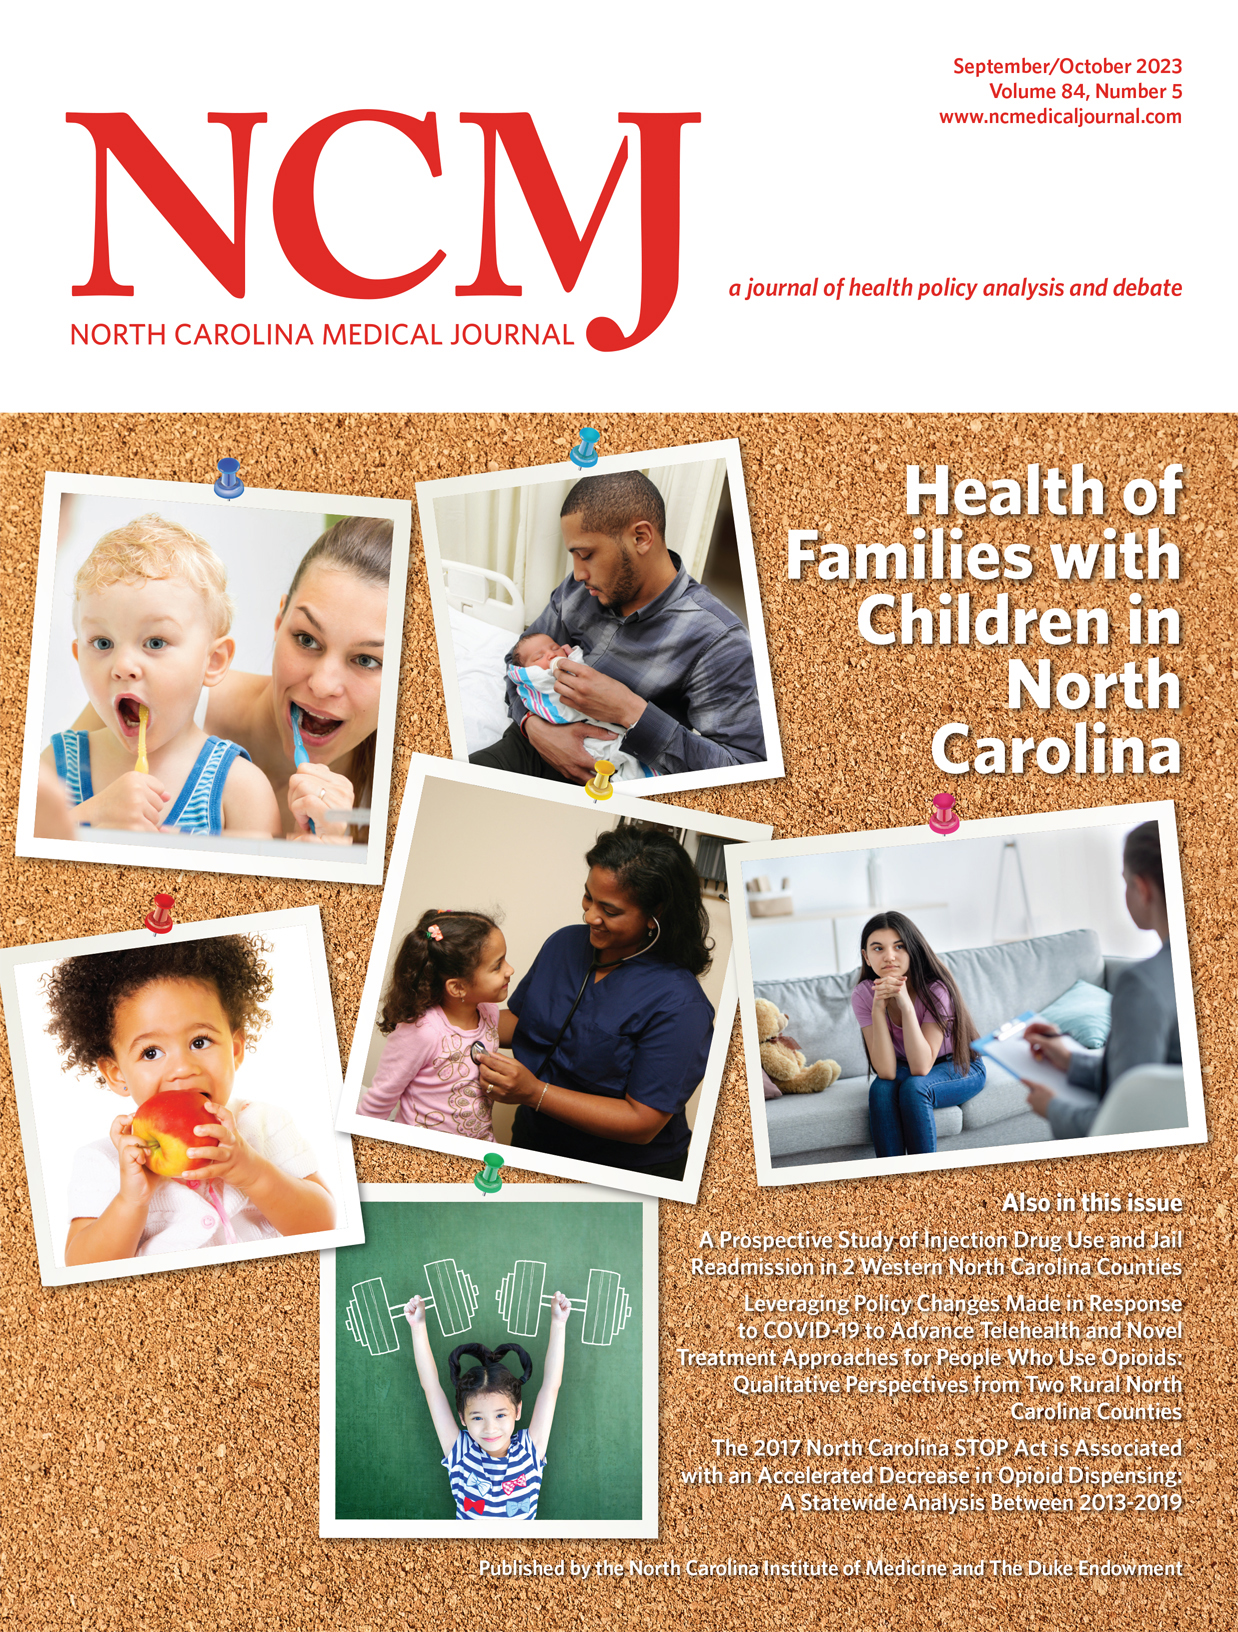 Health of Families with Children in North Carolina